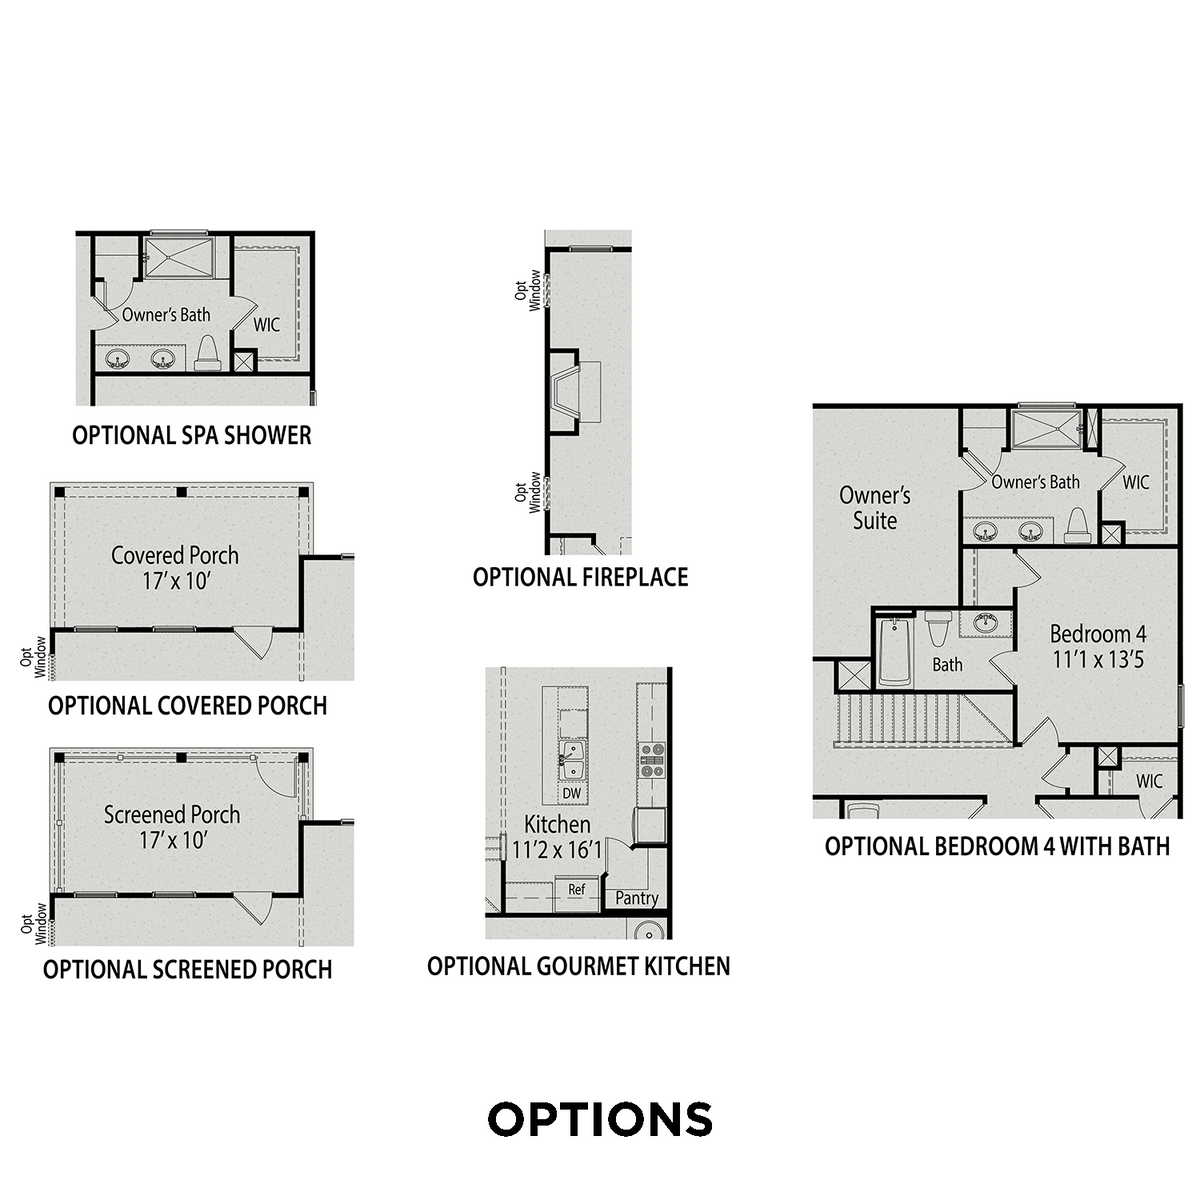 3 - The Grace A floor plan layout for 60 Grassy Ridge Court in Davidson Homes' Beverly Place community.